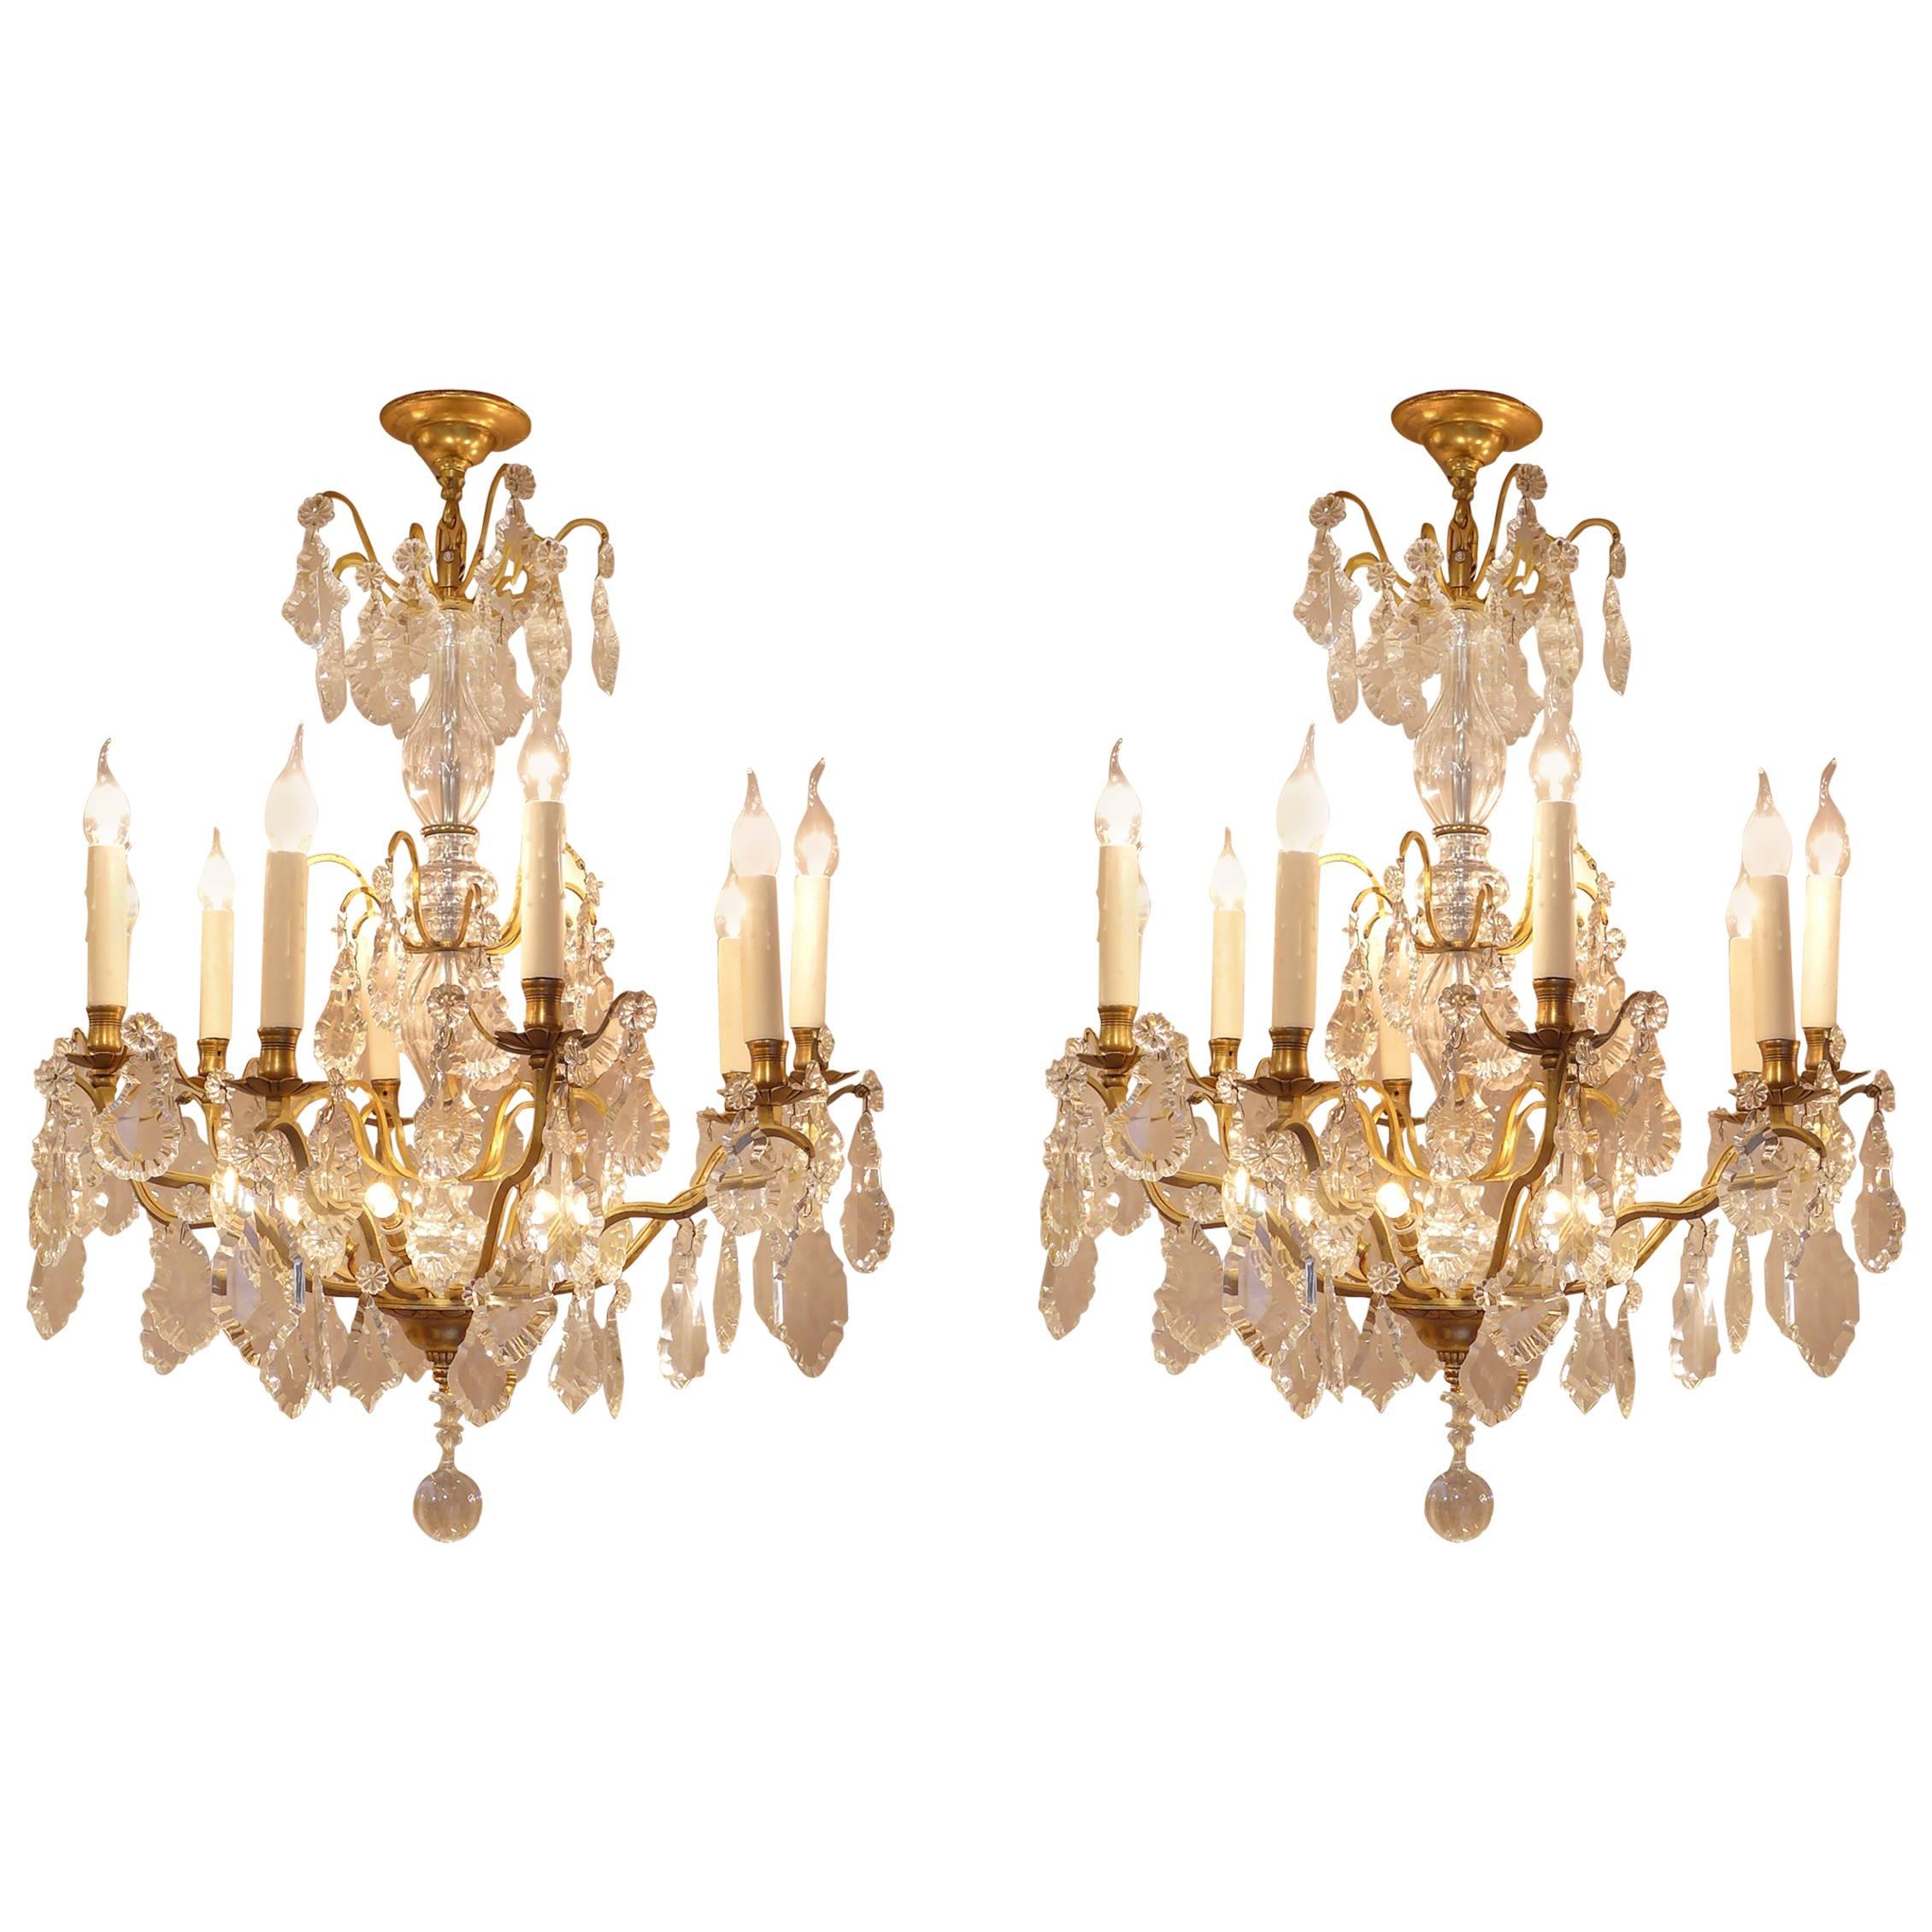 French Pair of Louis XVI Style Gilt Bronze and Chrystal Chandeliers, circa 1920